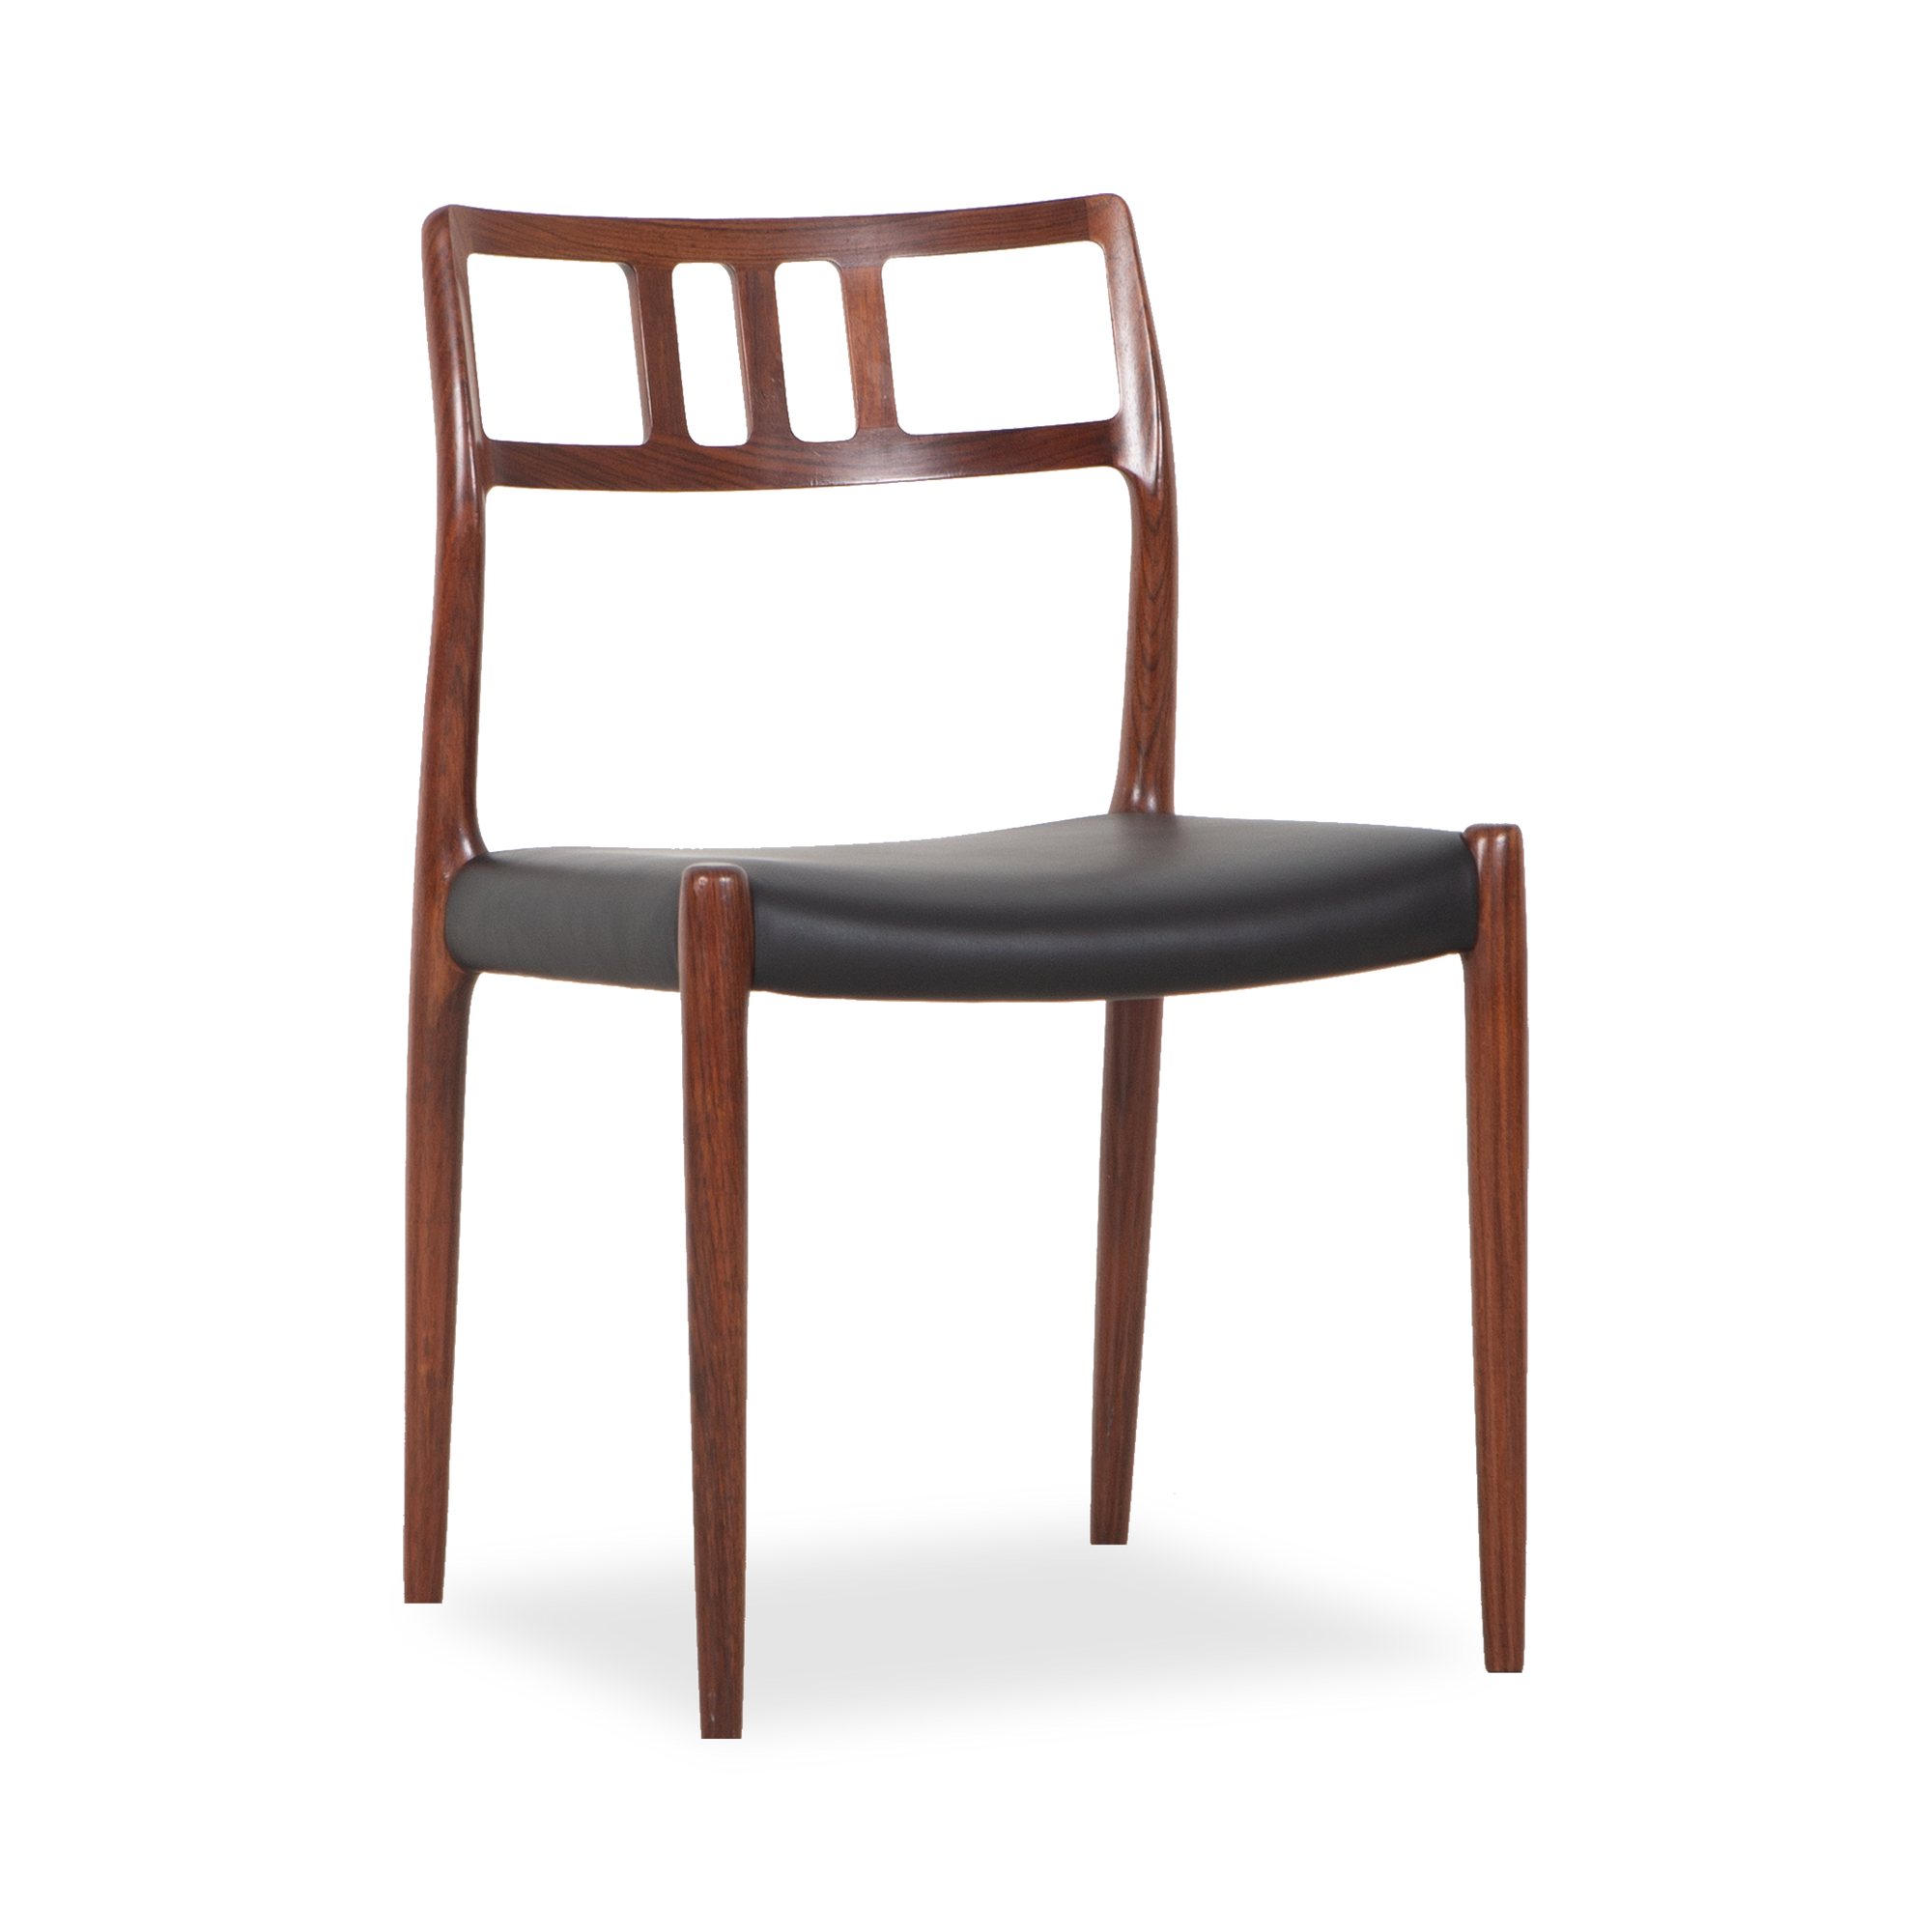 Embodying iconic Scandinavian design structures, this vintage Model 79 Chair was designed by Niels Otto Moller and manufactured by J.